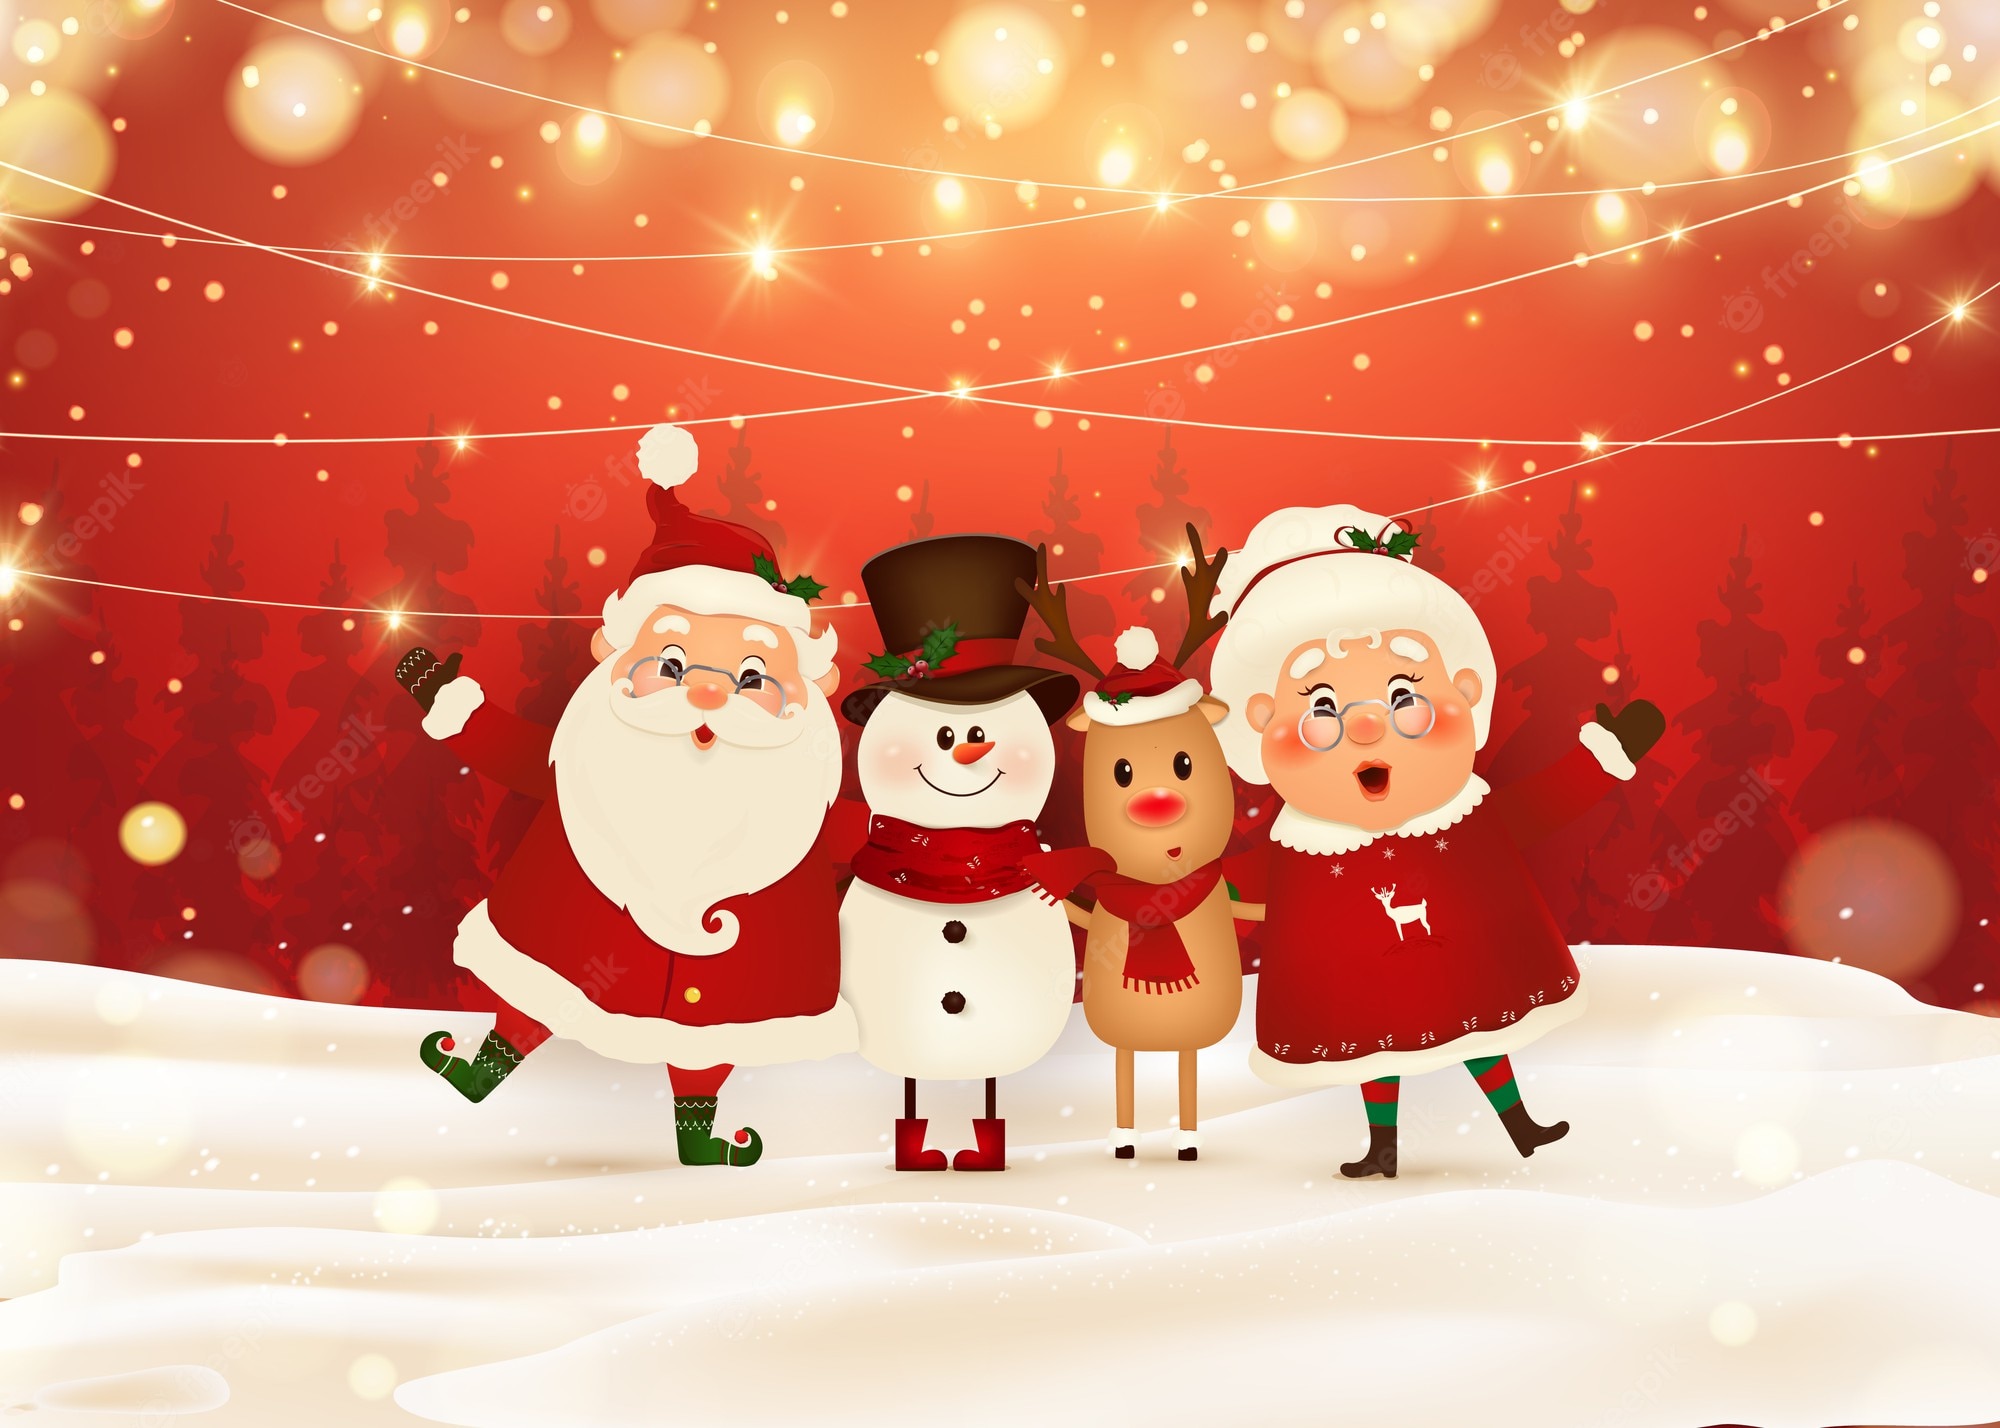 Premium Vector. Merry Christmas. Happy New Year. Funny Santa Claus With Mrs. Claus, Red Nosed Reindeer, Snowman In Christmas Snow Scene Winter Landscape. Mrs. Claus Together. Cartoon Character Of Santa Claus